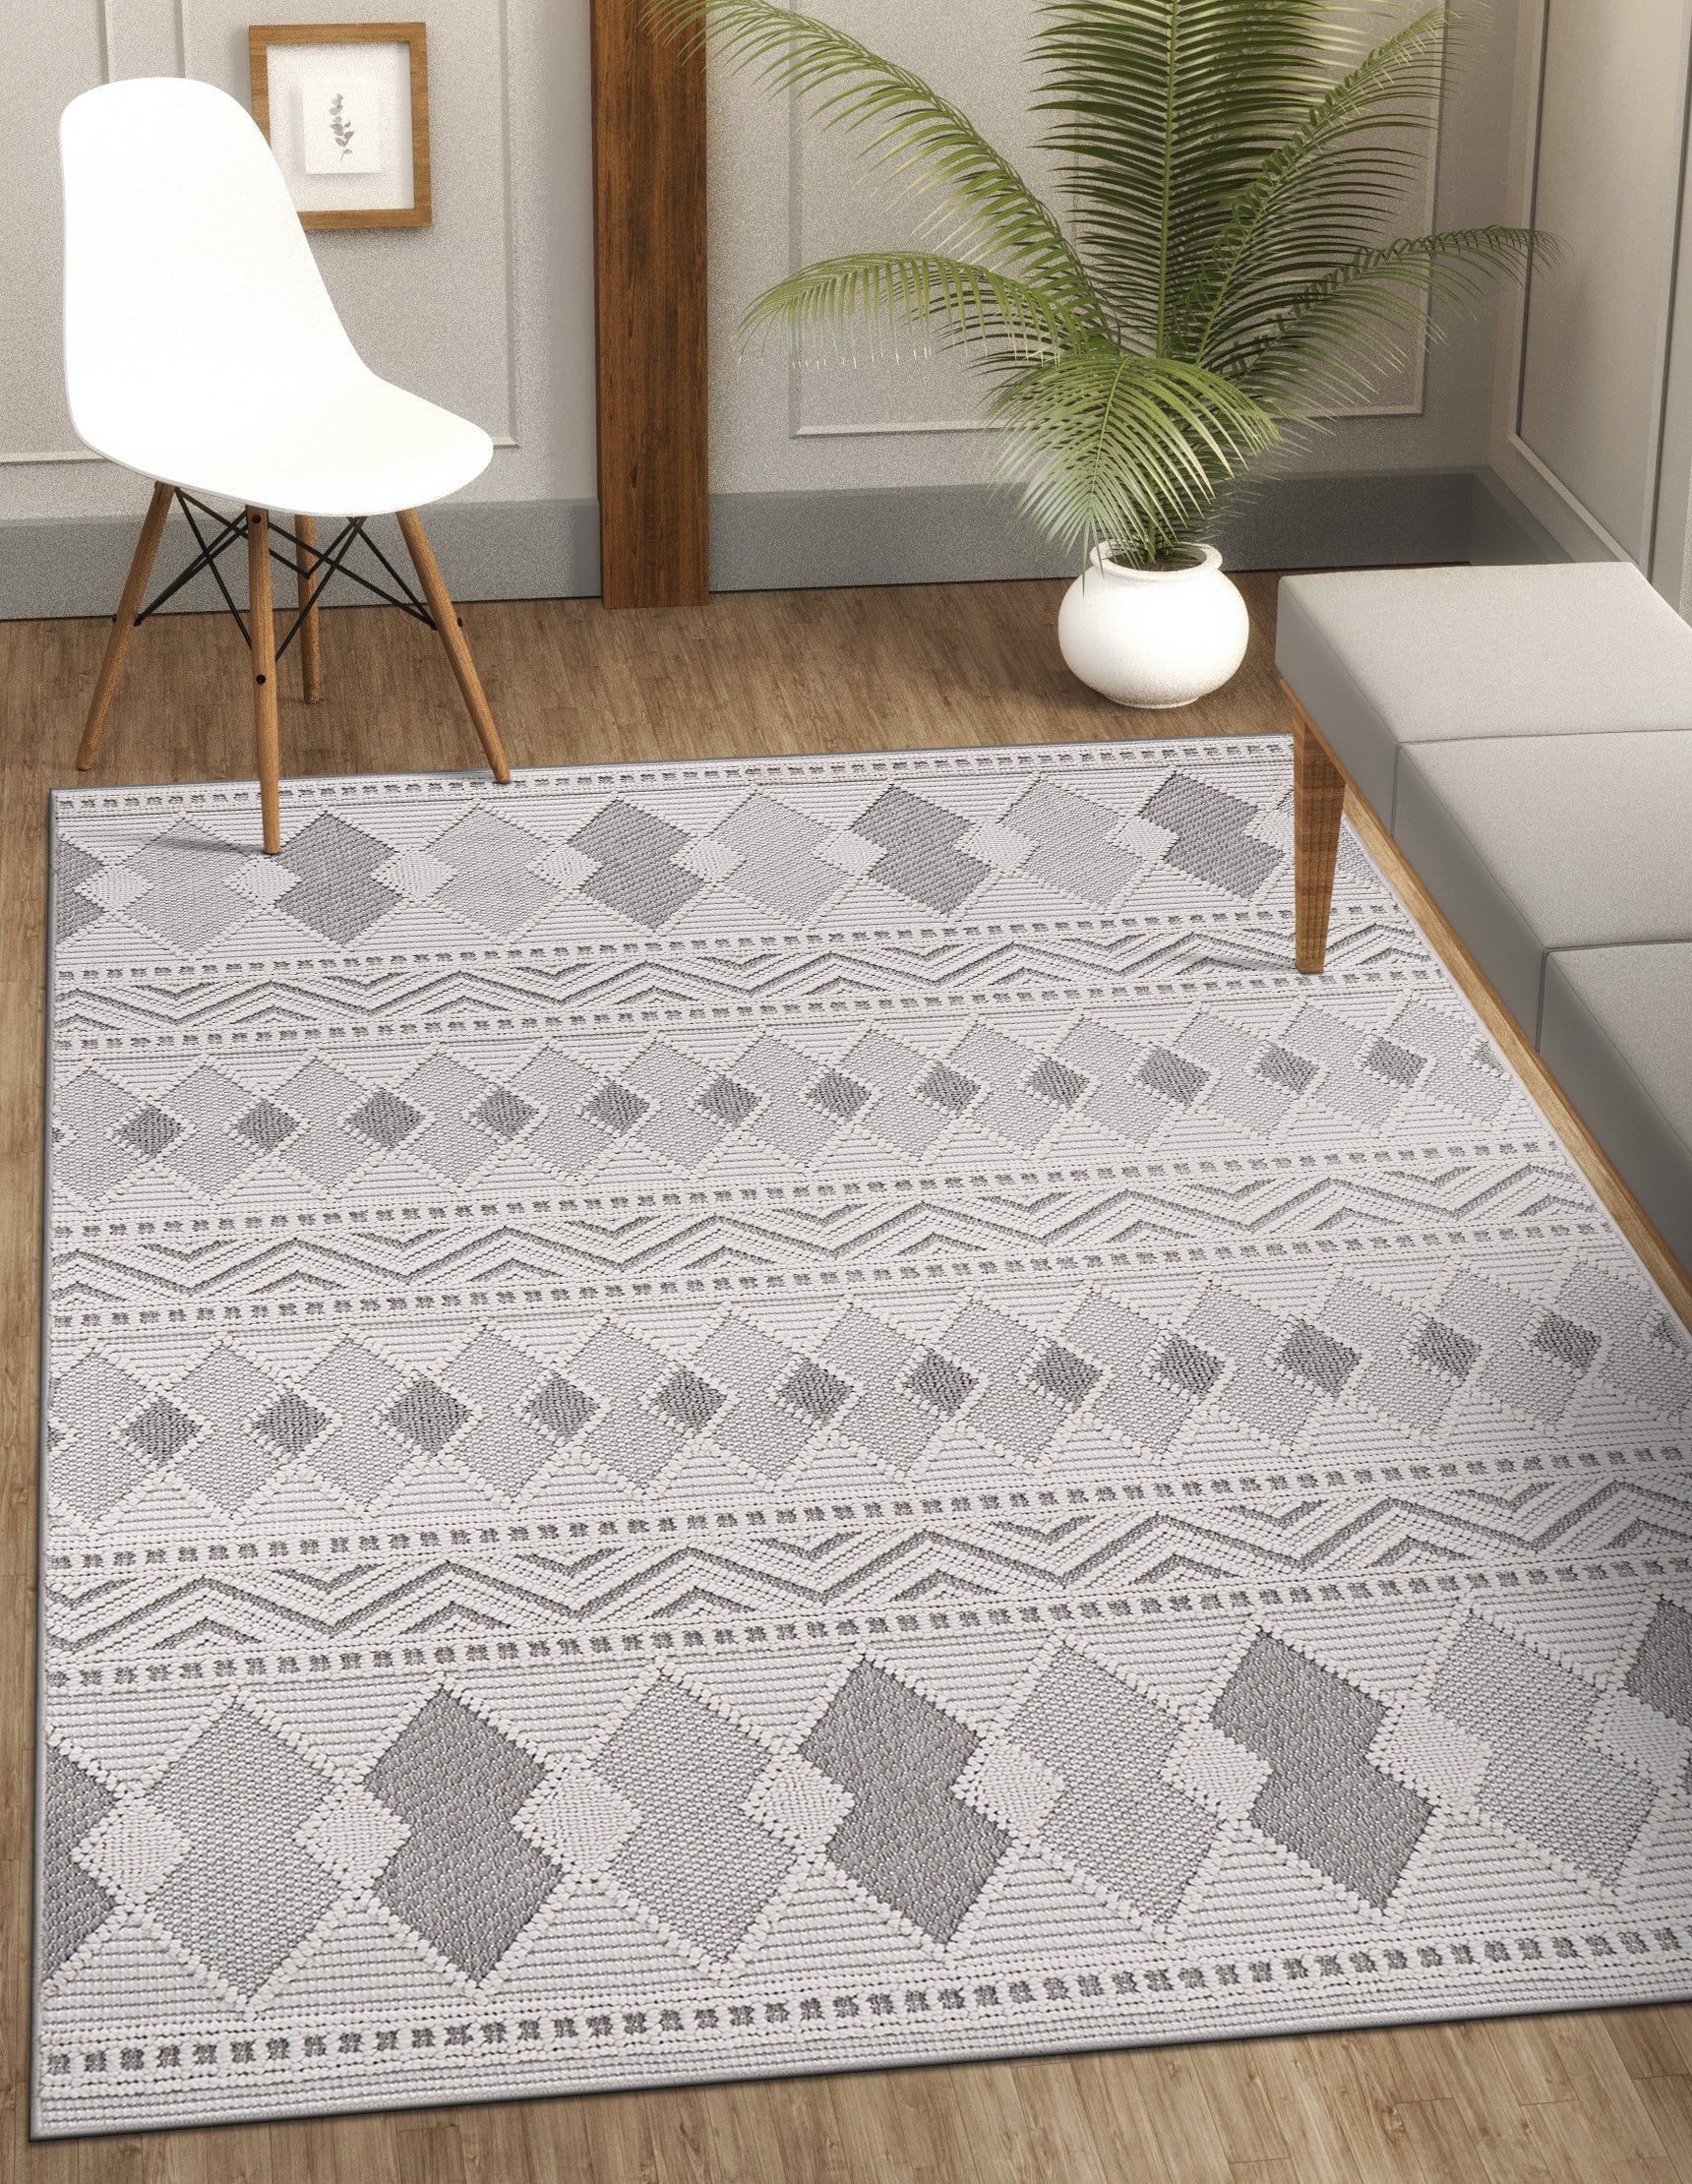 Micro Loop Area Rugs  GY6 - White / Gray